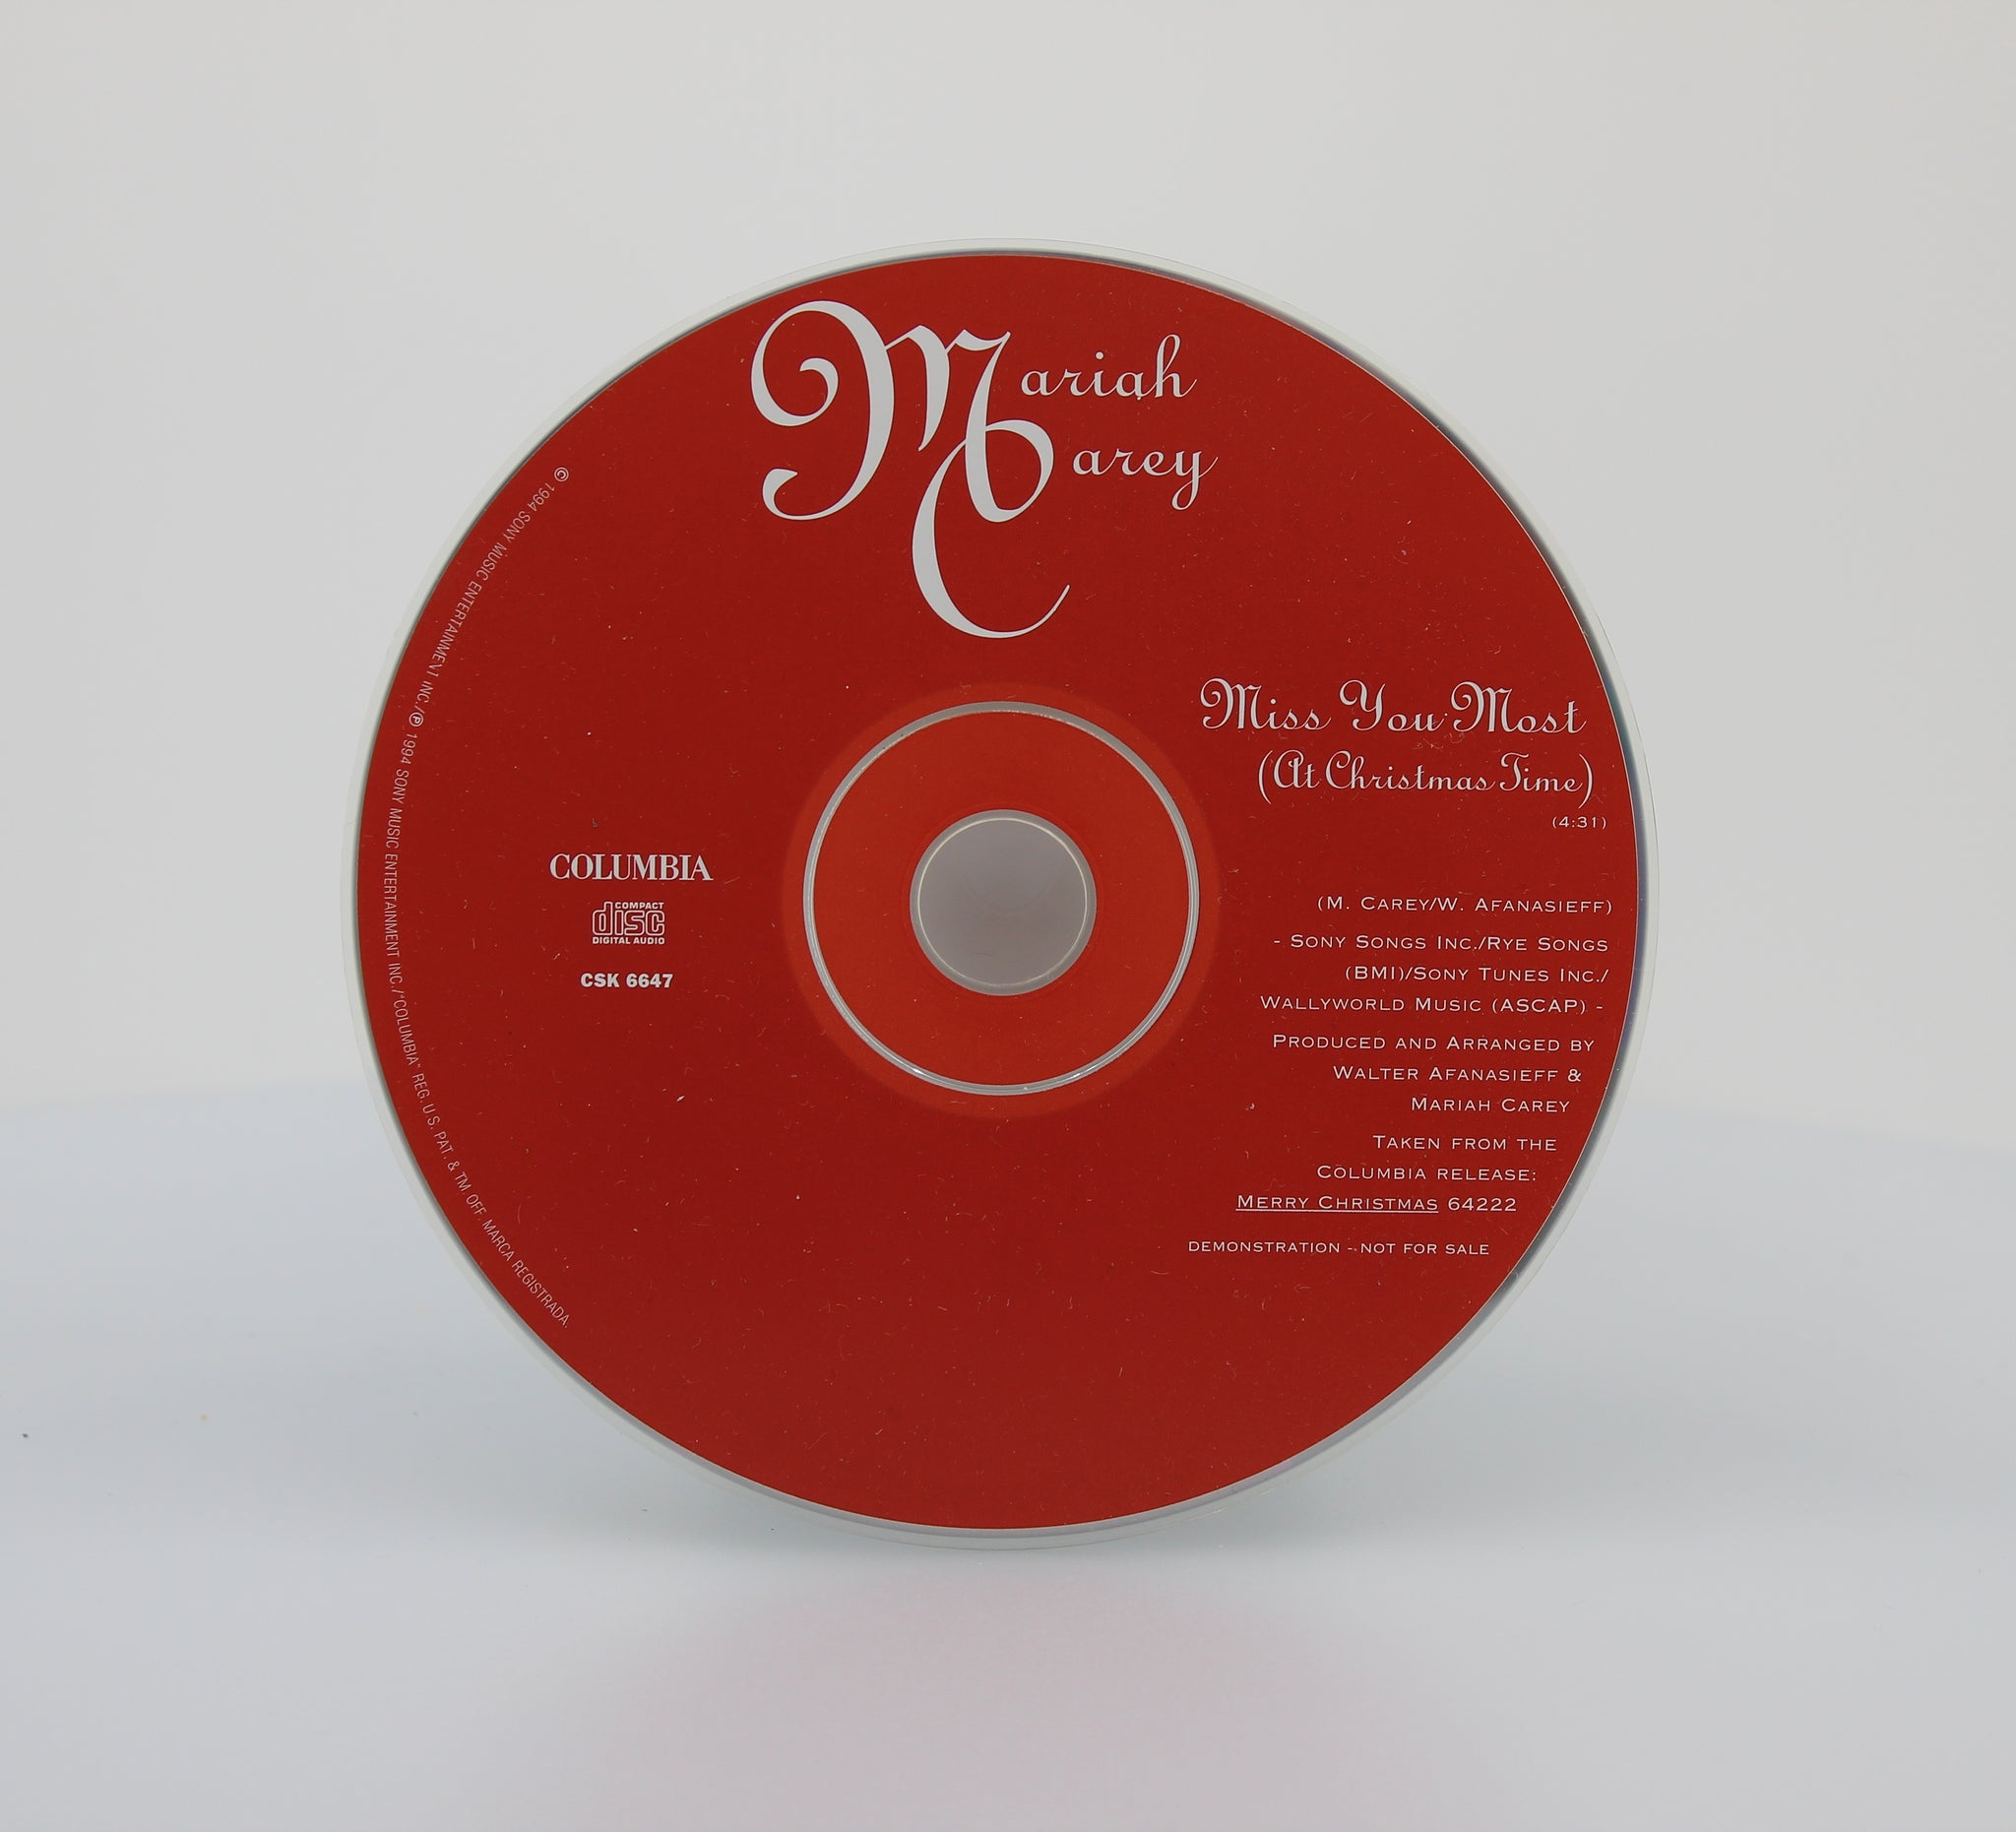 Mariah Carey ‎– Miss You Most (At Christmas Time), CD Single Promo 